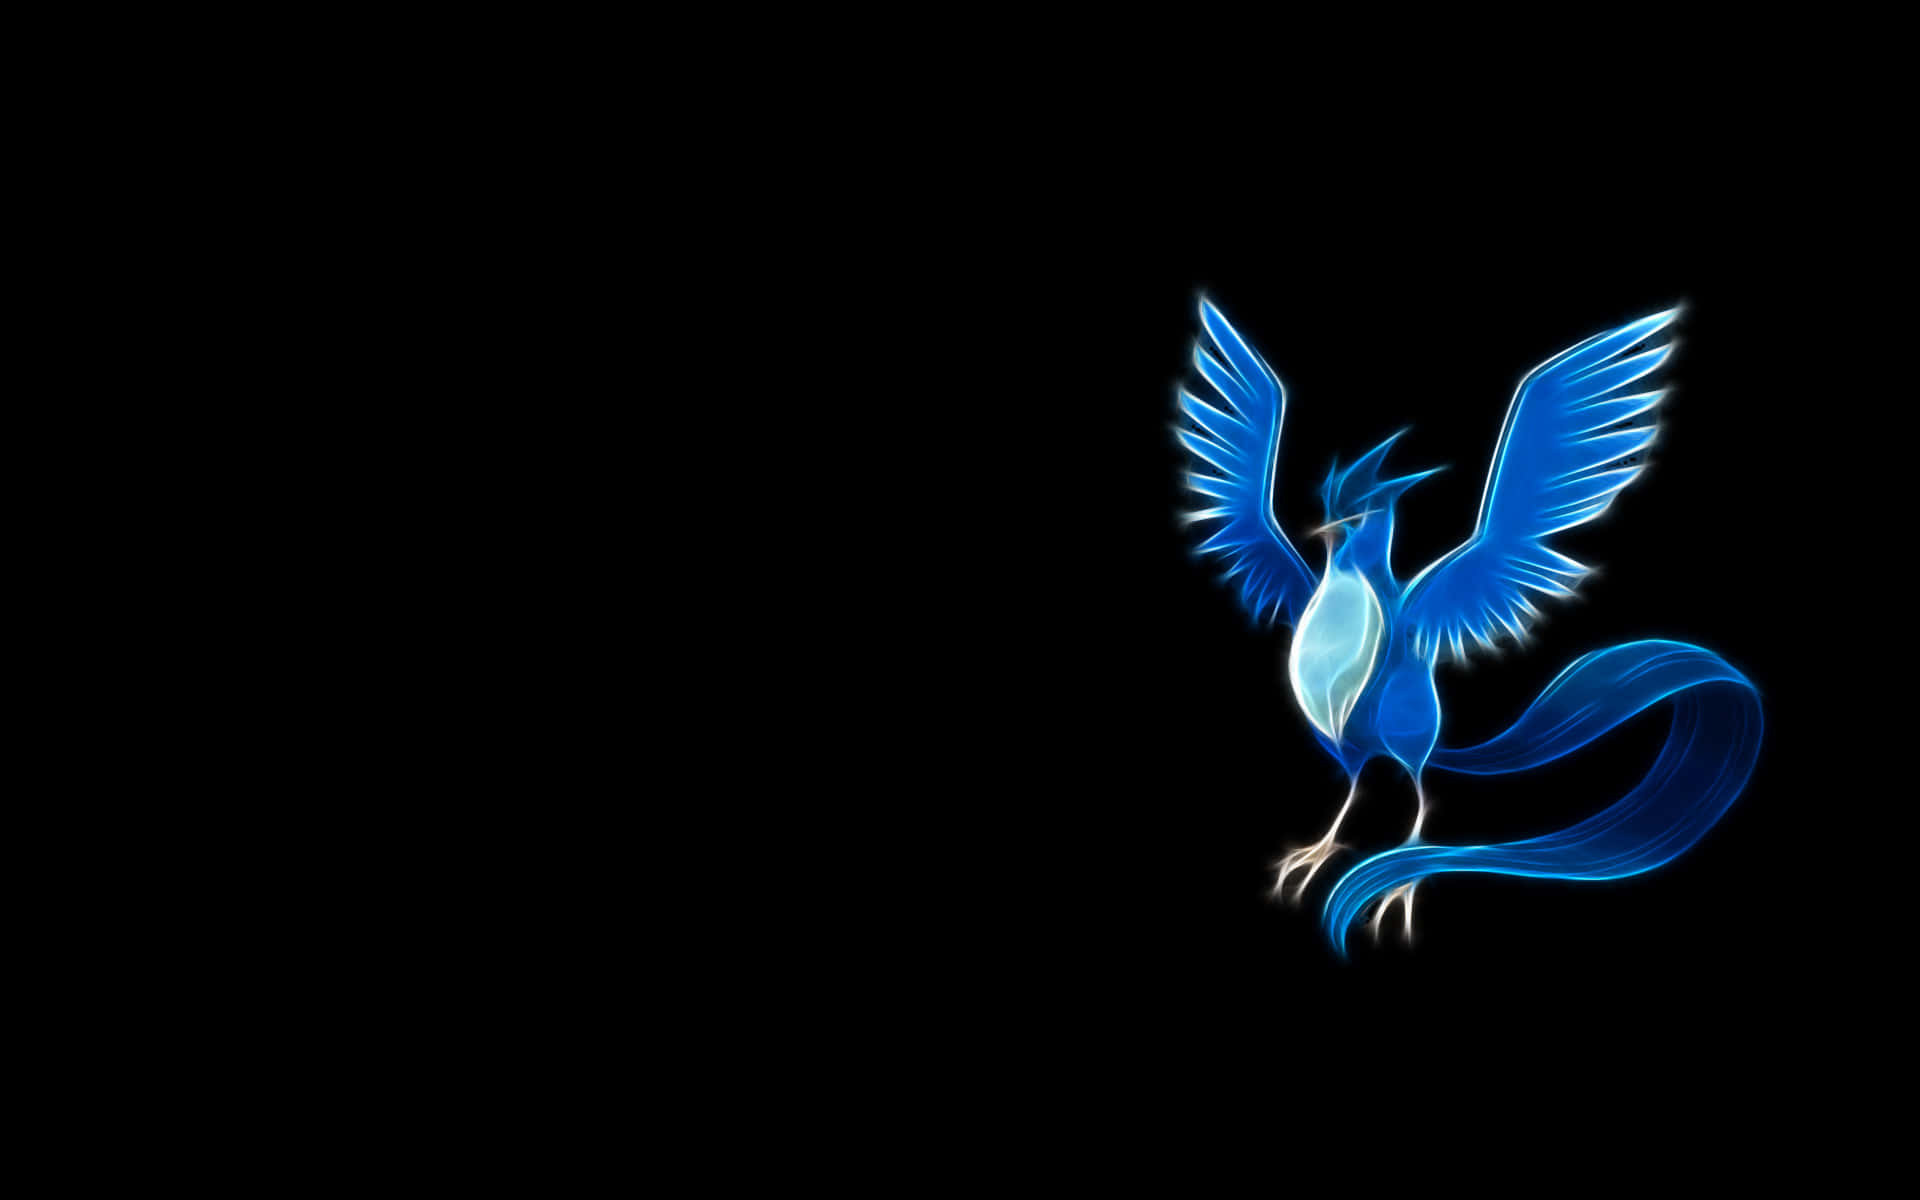 Download Glowing Neon Zapdos, Articuno, And Moltres Wallpaper